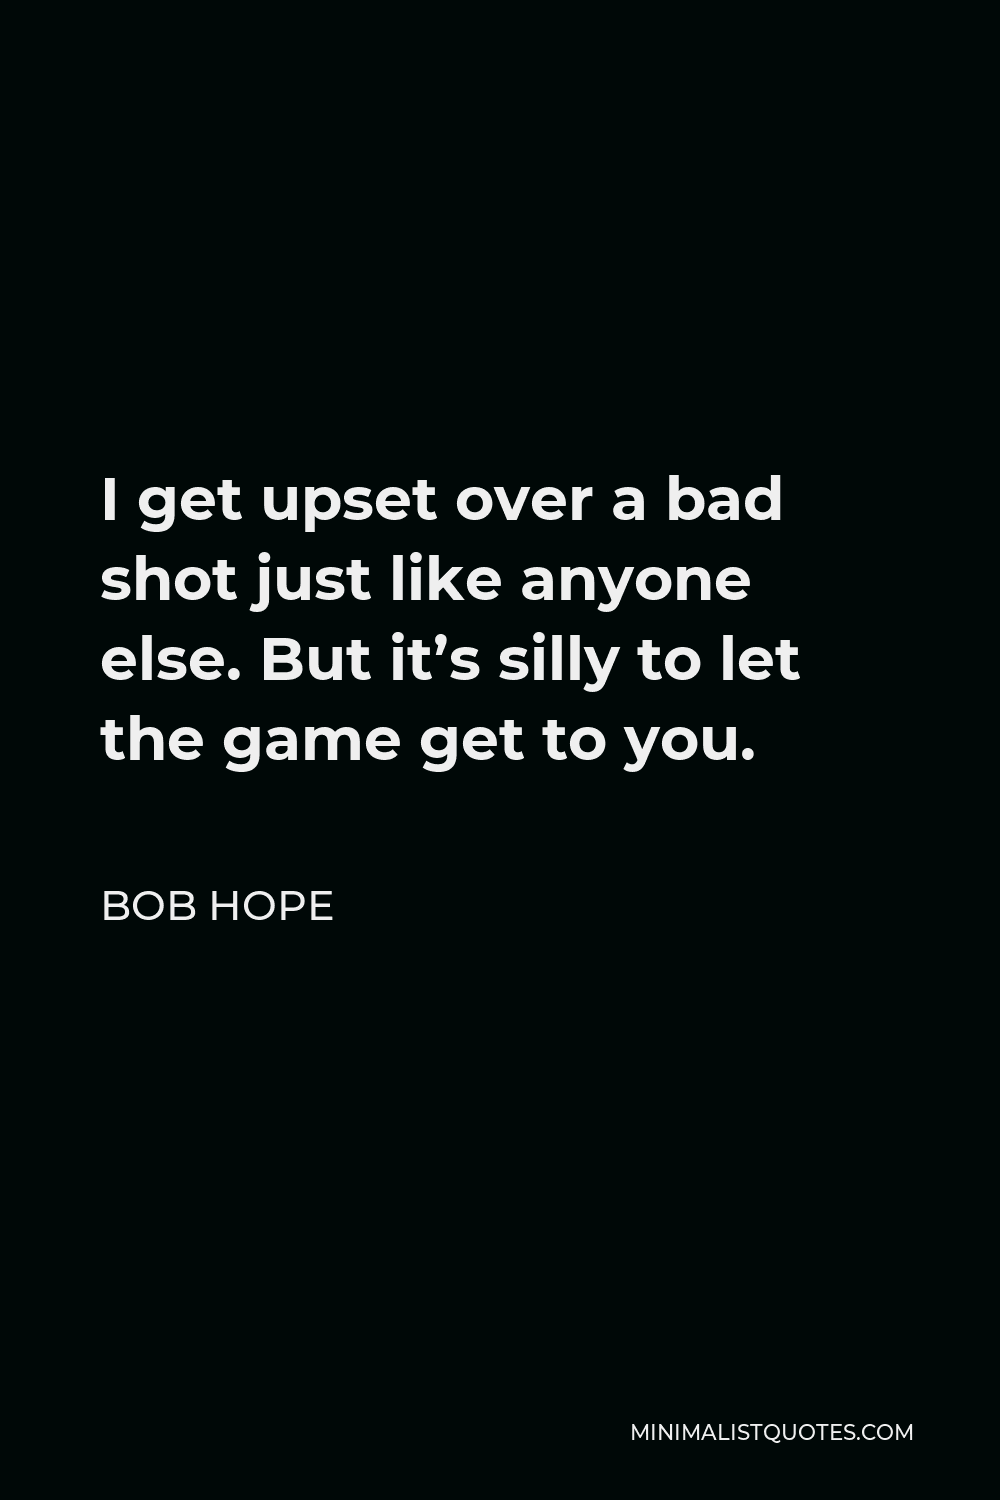 Bob Hope Quote - I get upset over a bad shot just like anyone else. But it’s silly to let the game get to you.